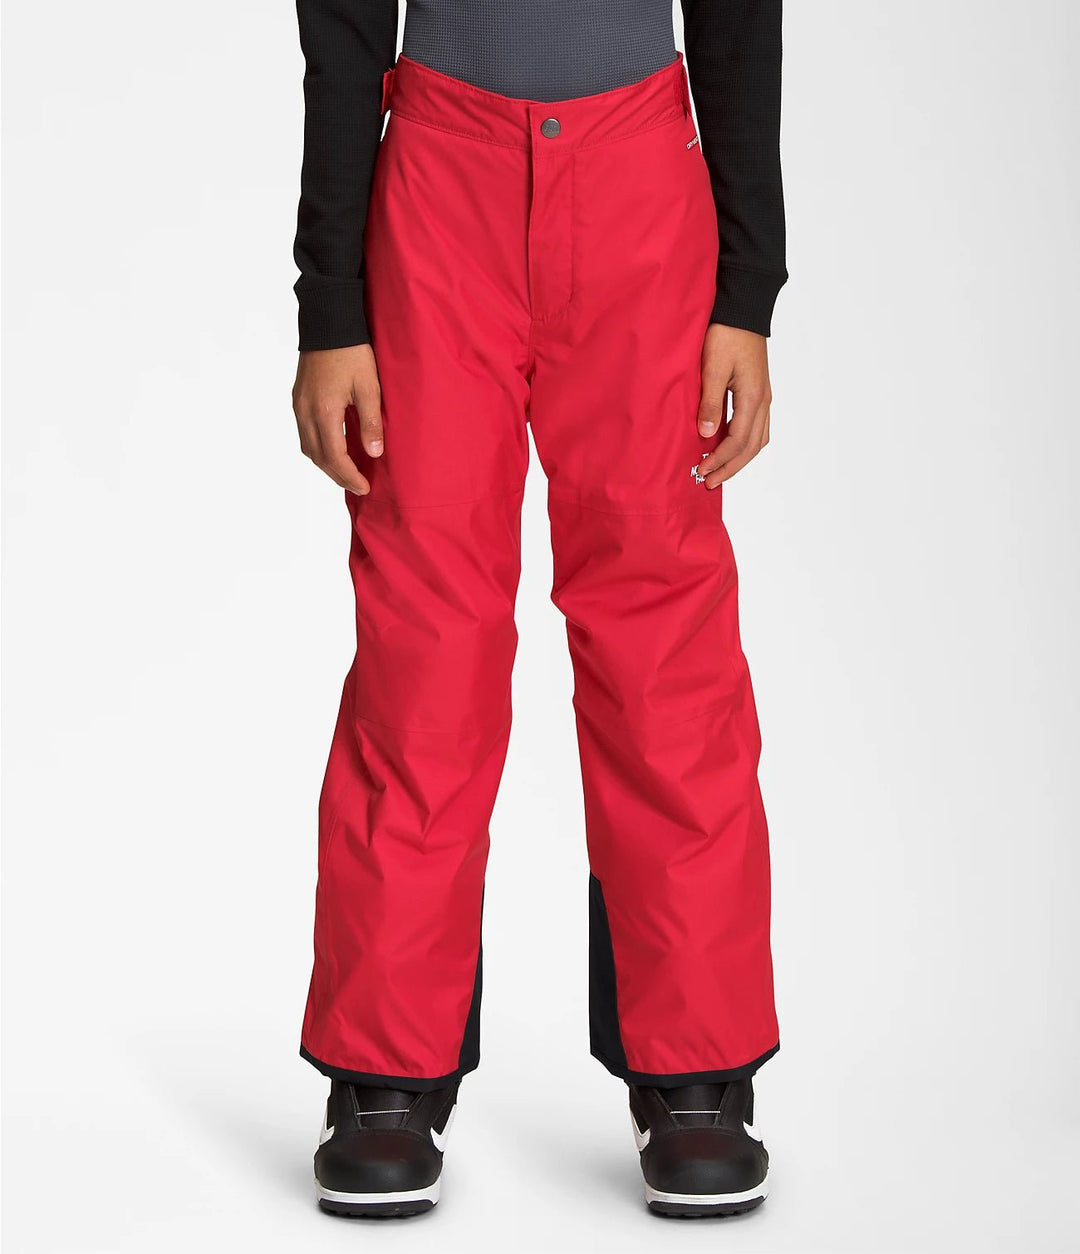 Boone Mountain Sports - B FREEDOM INSULATED PANT